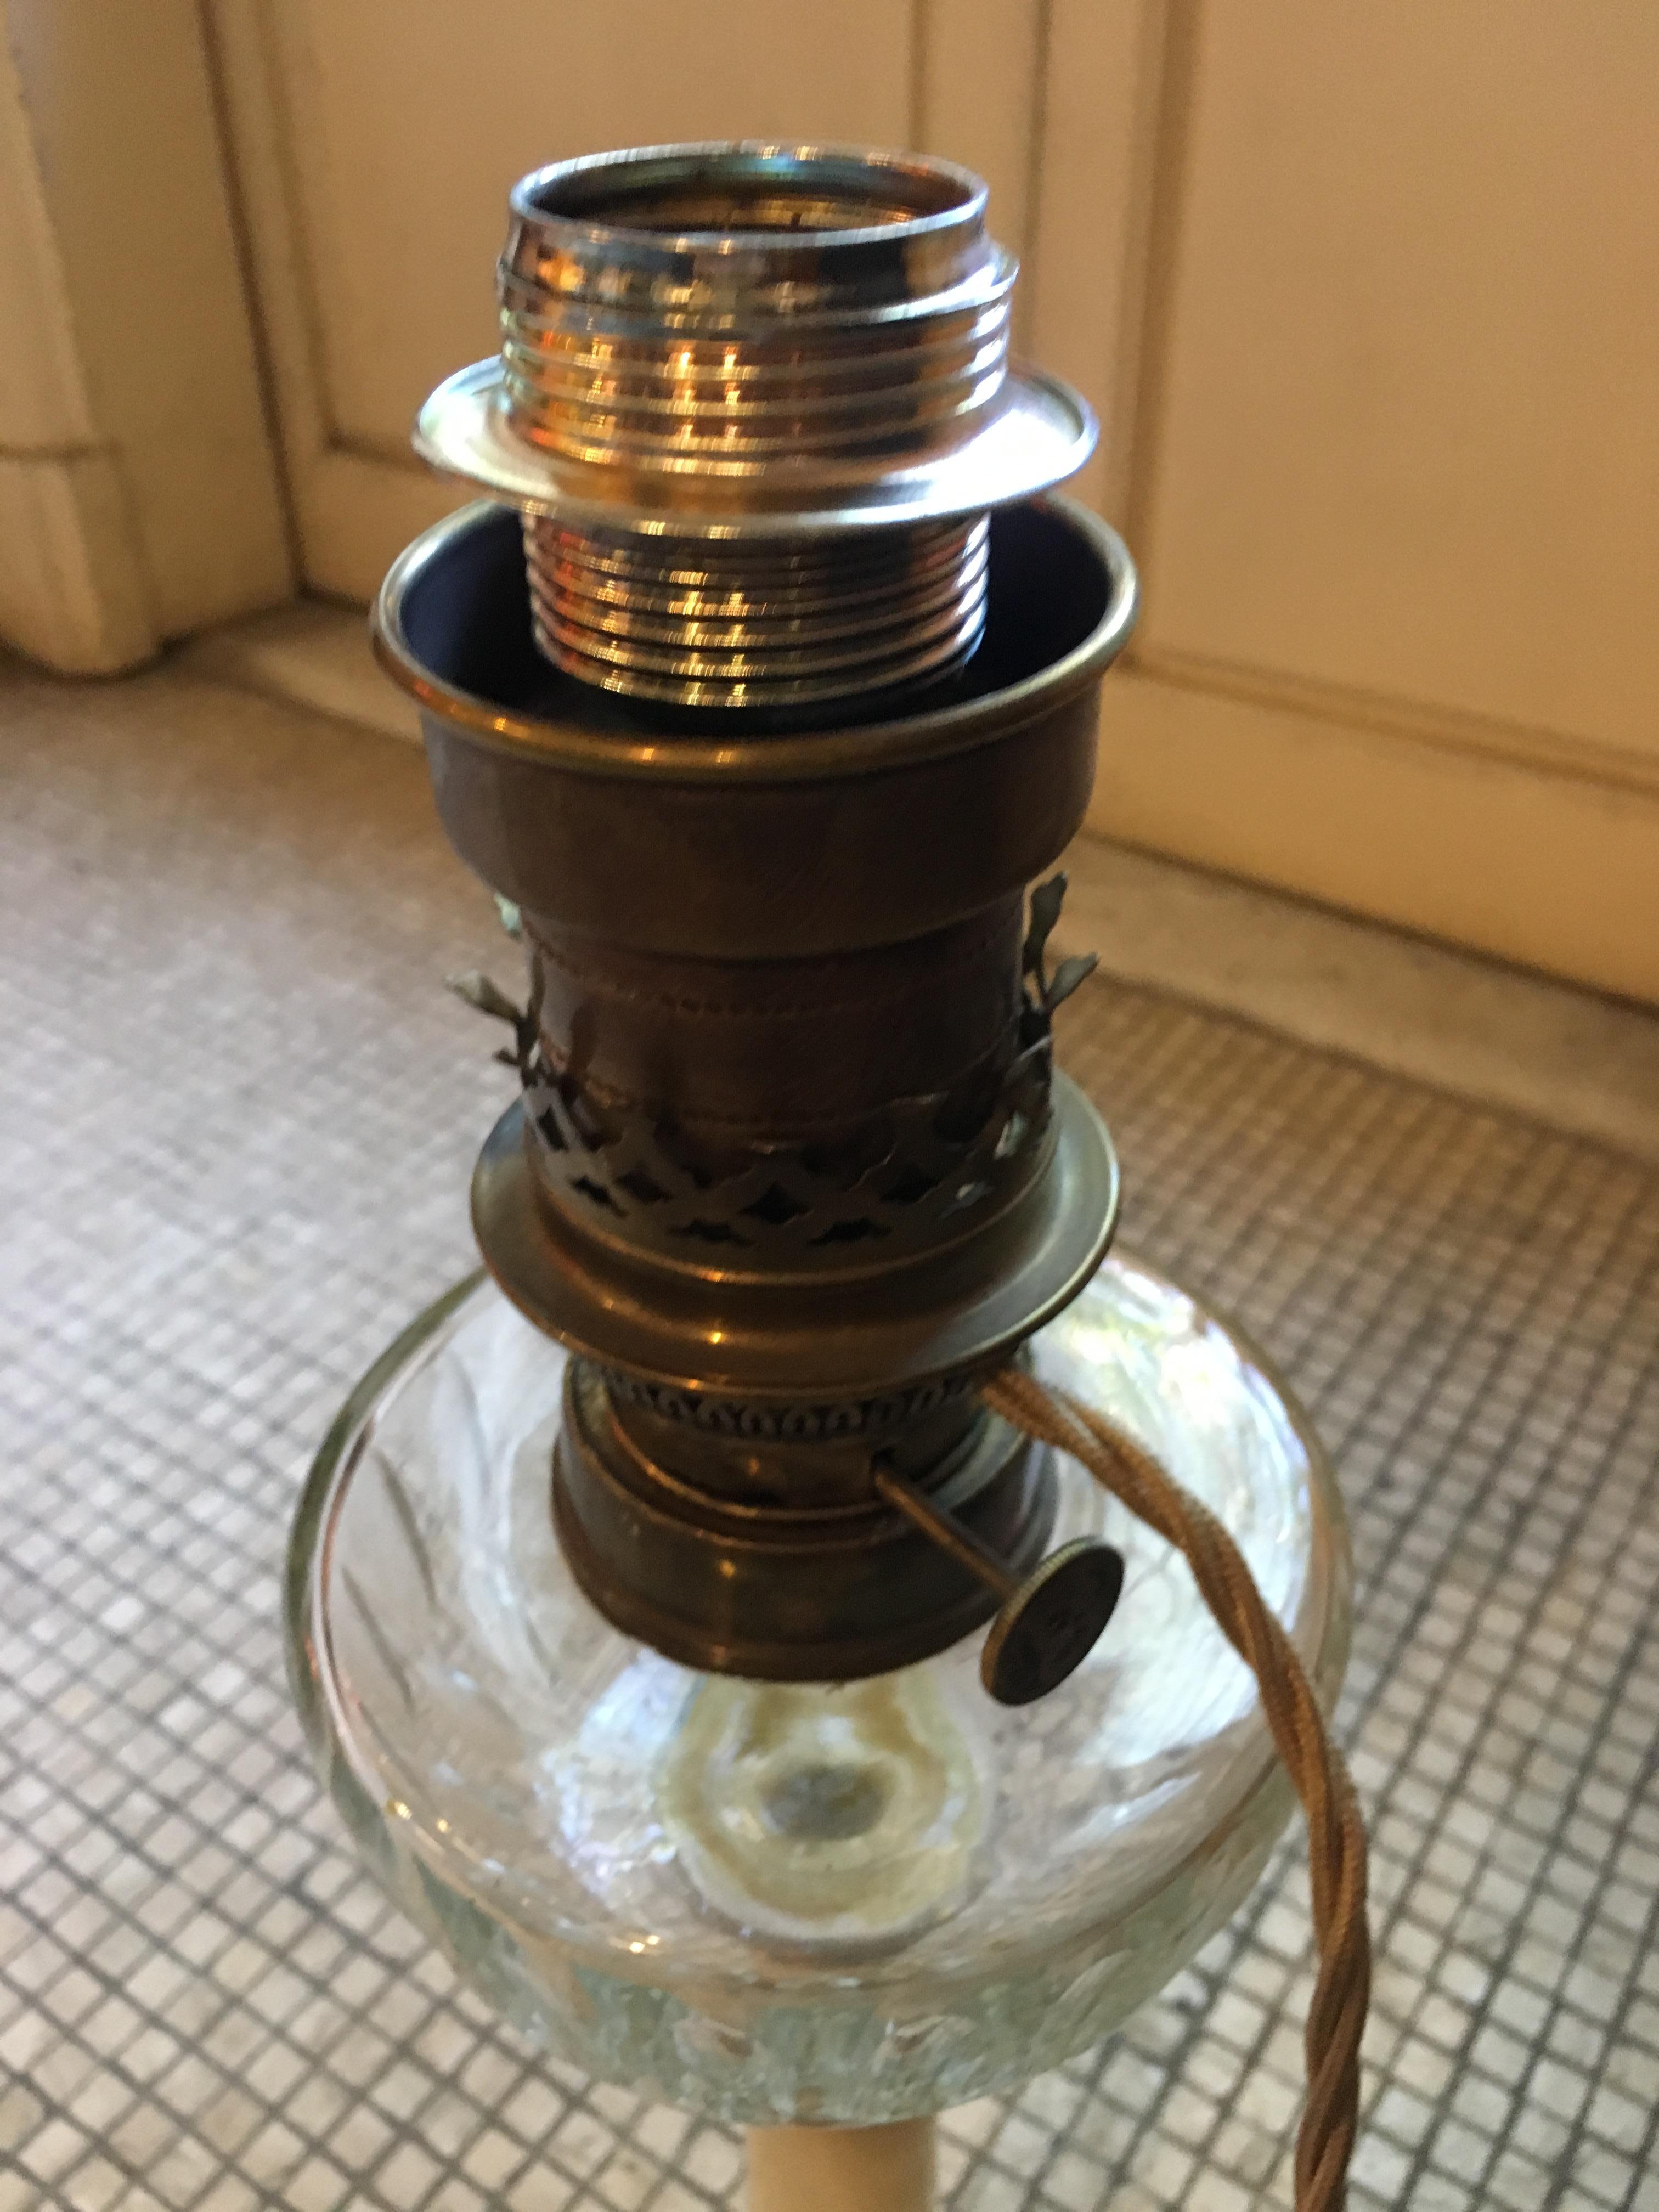 19th Century French Oil Lamp with Glass and Marble Converted into Electric Lamp (Viktorianisch) im Angebot